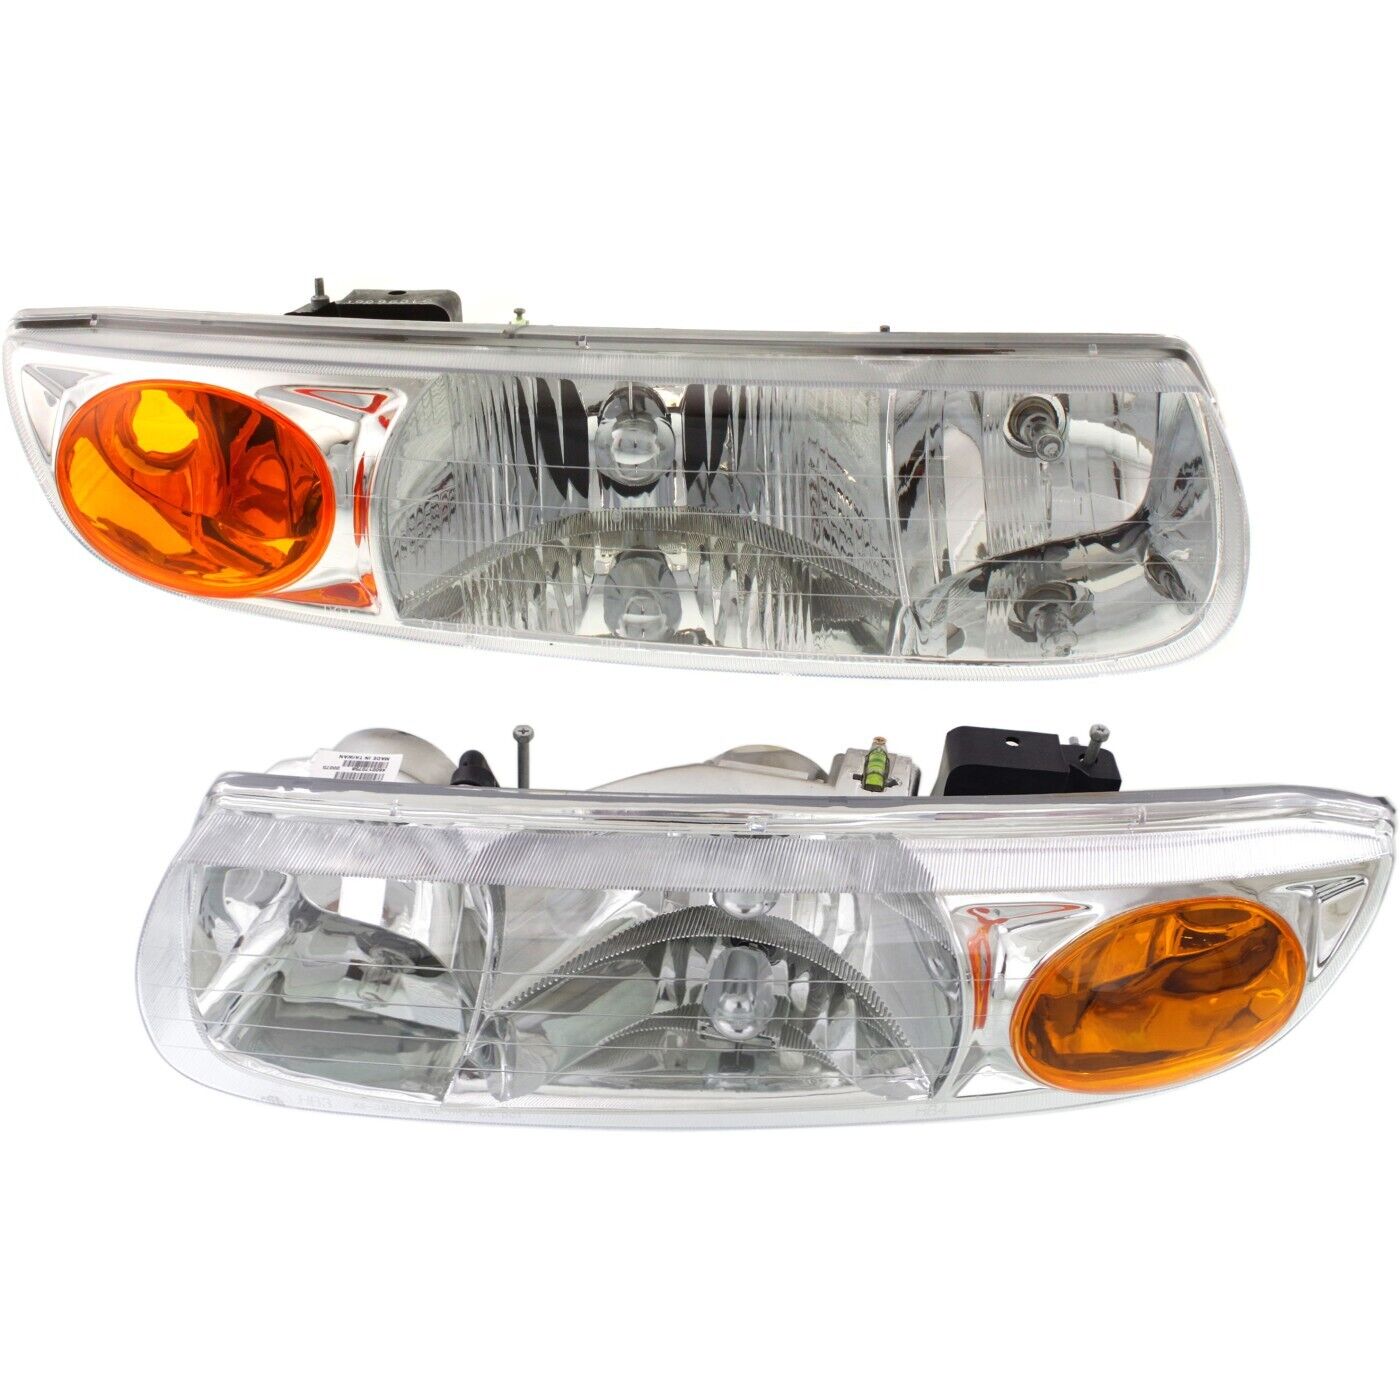 Headlight Assembly Set For 2000-2002 Saturn SL2 SL1 SL Left Right Side With Bulb